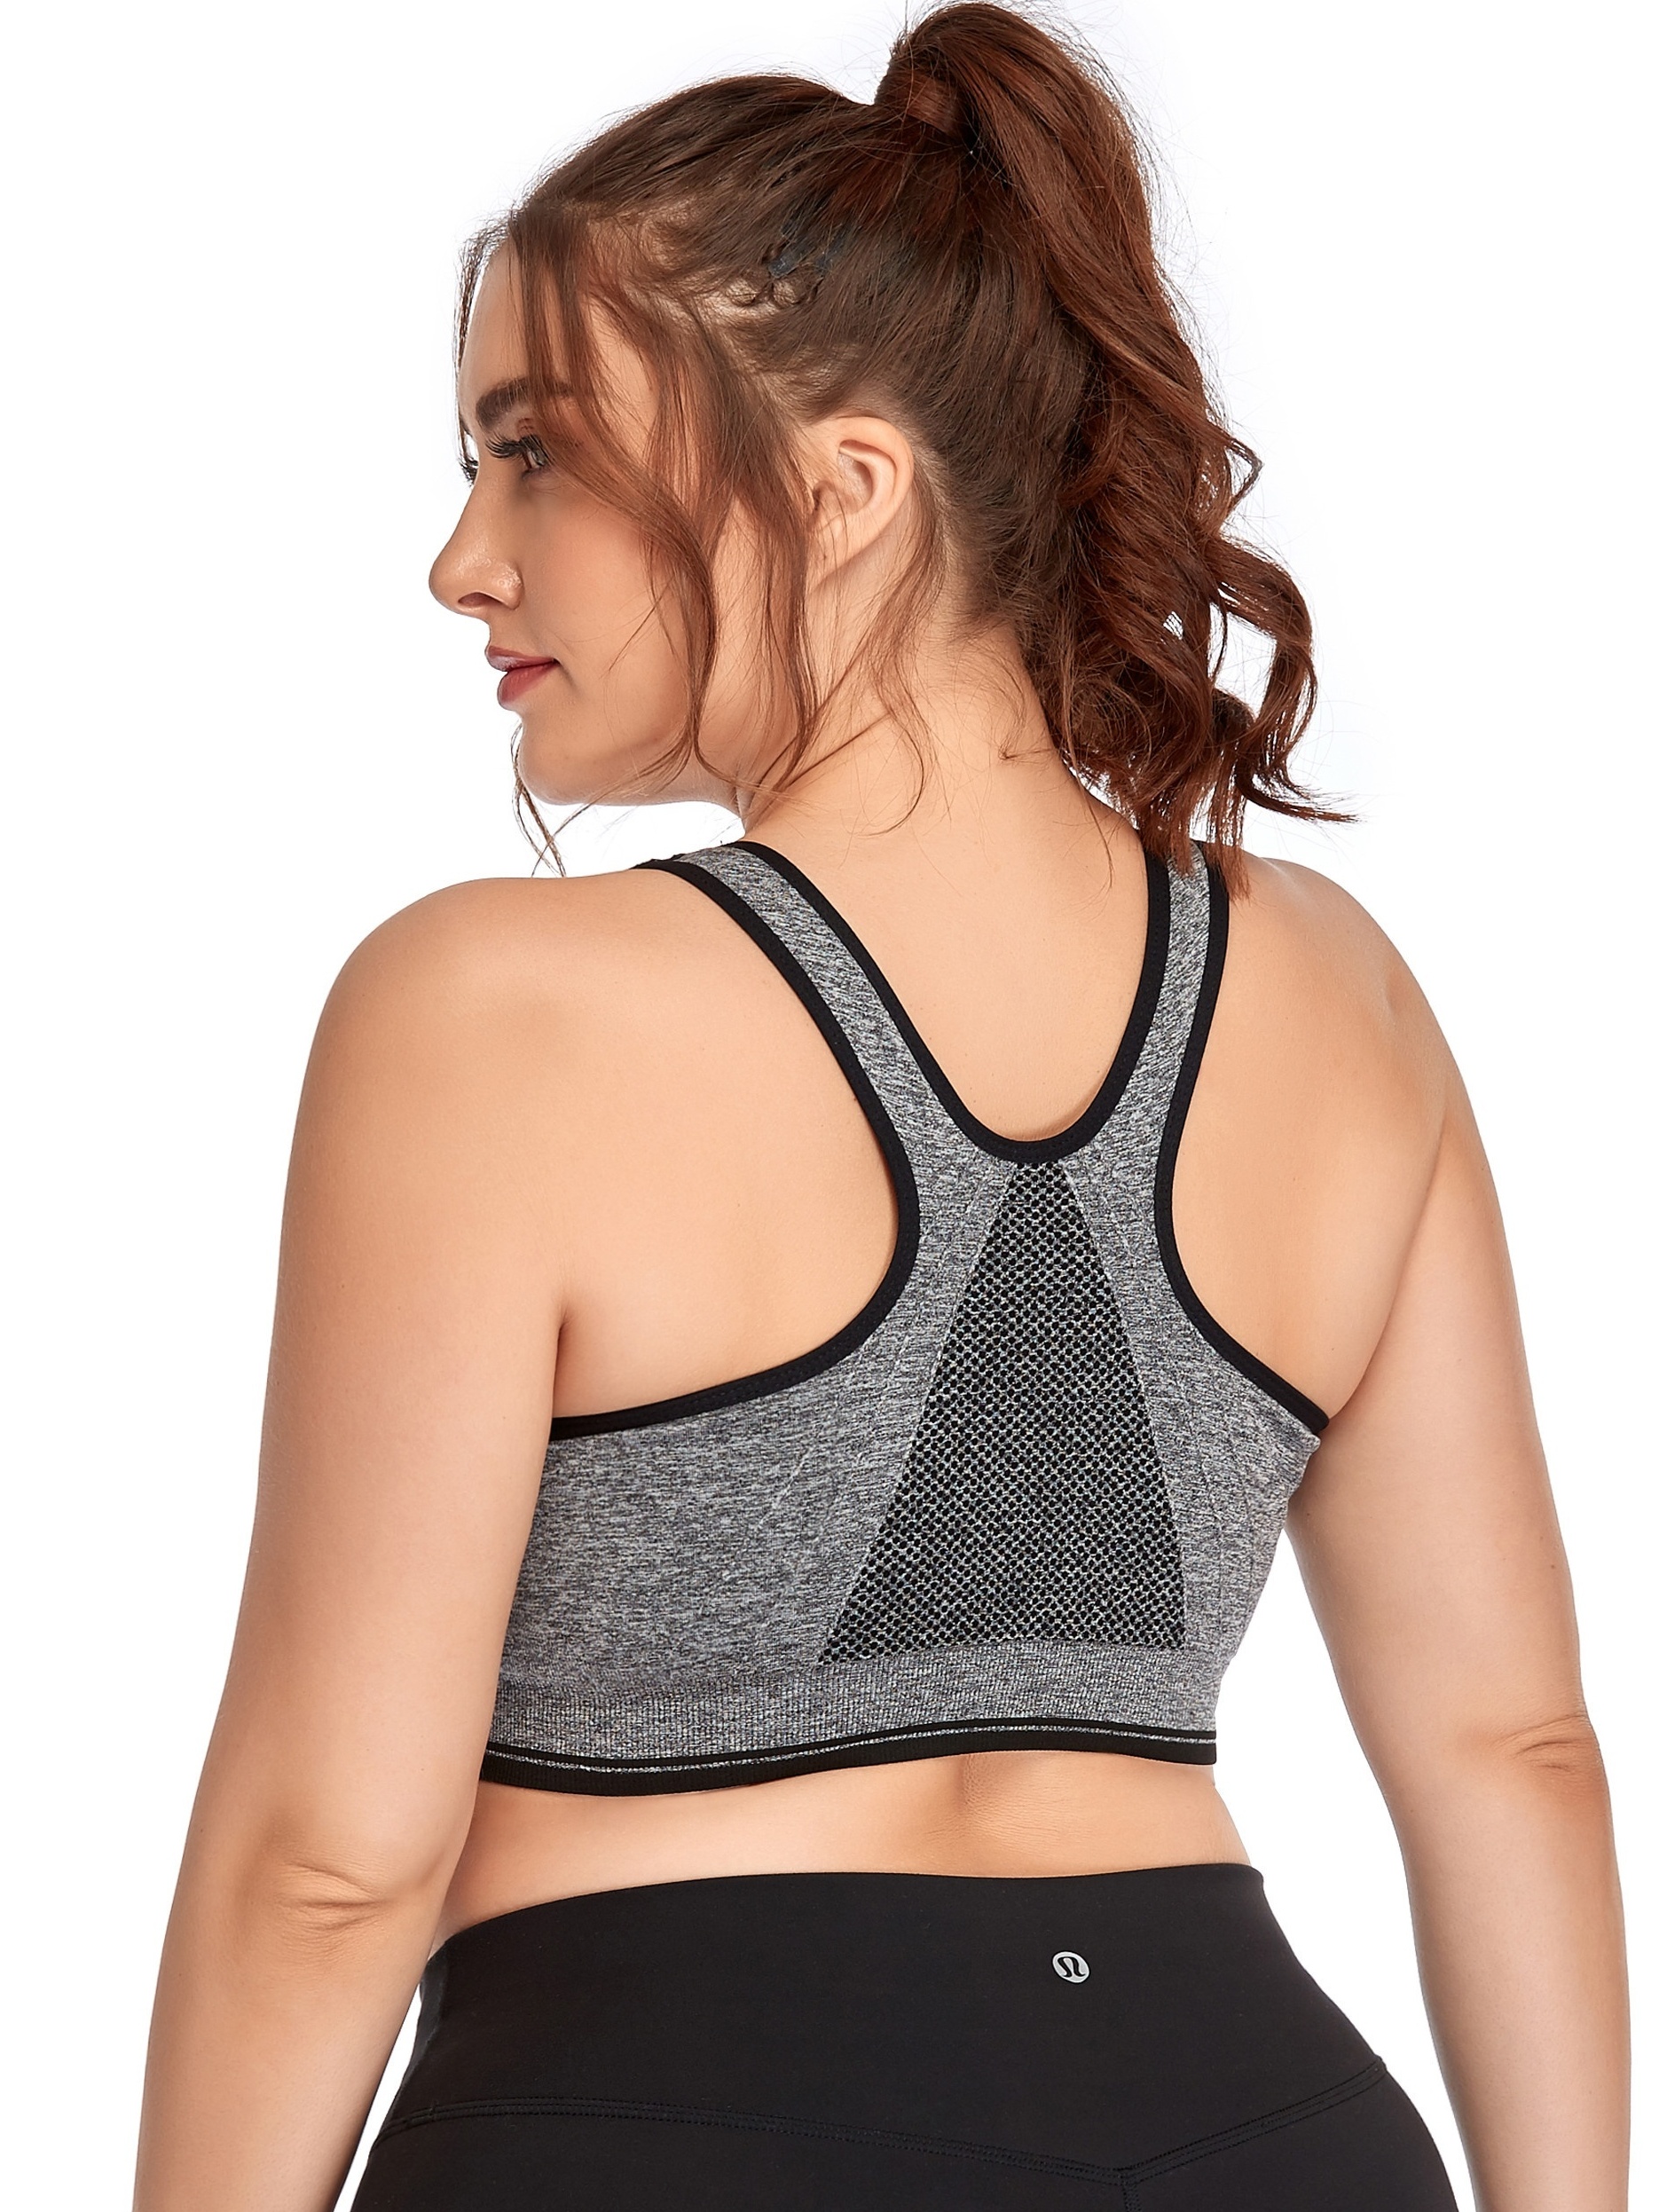 Best Sports Bras For Running Removable Pads 